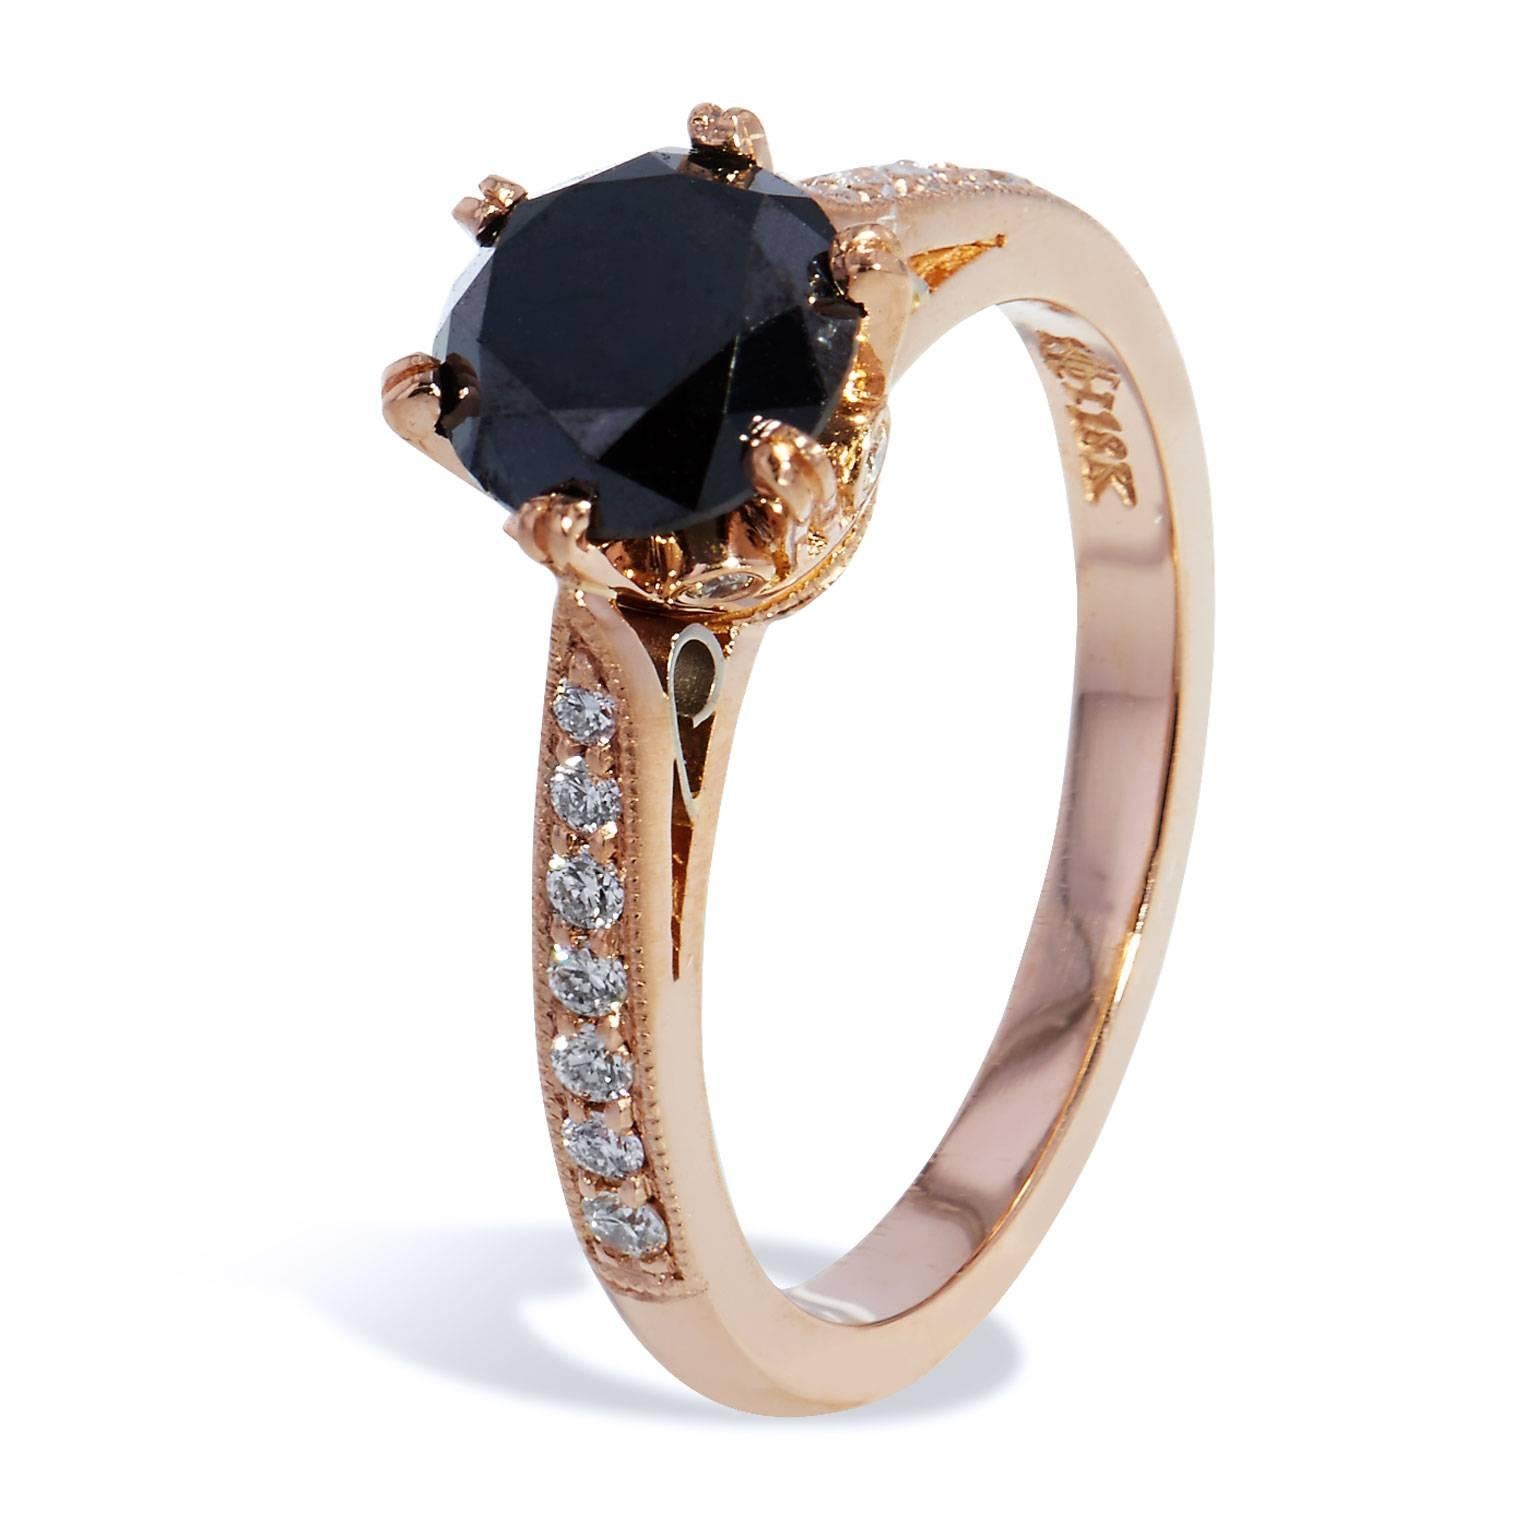 H&H 1.42 Black Diamond Engagement Ring 18 Karat Rose Gold

Evoke mystery and intrigue with this stunning, handmade H and H black diamond and rose gold engagement ring. 
The 18 karat rose gold embraces 0.17 carat of pave set diamonds streaming down